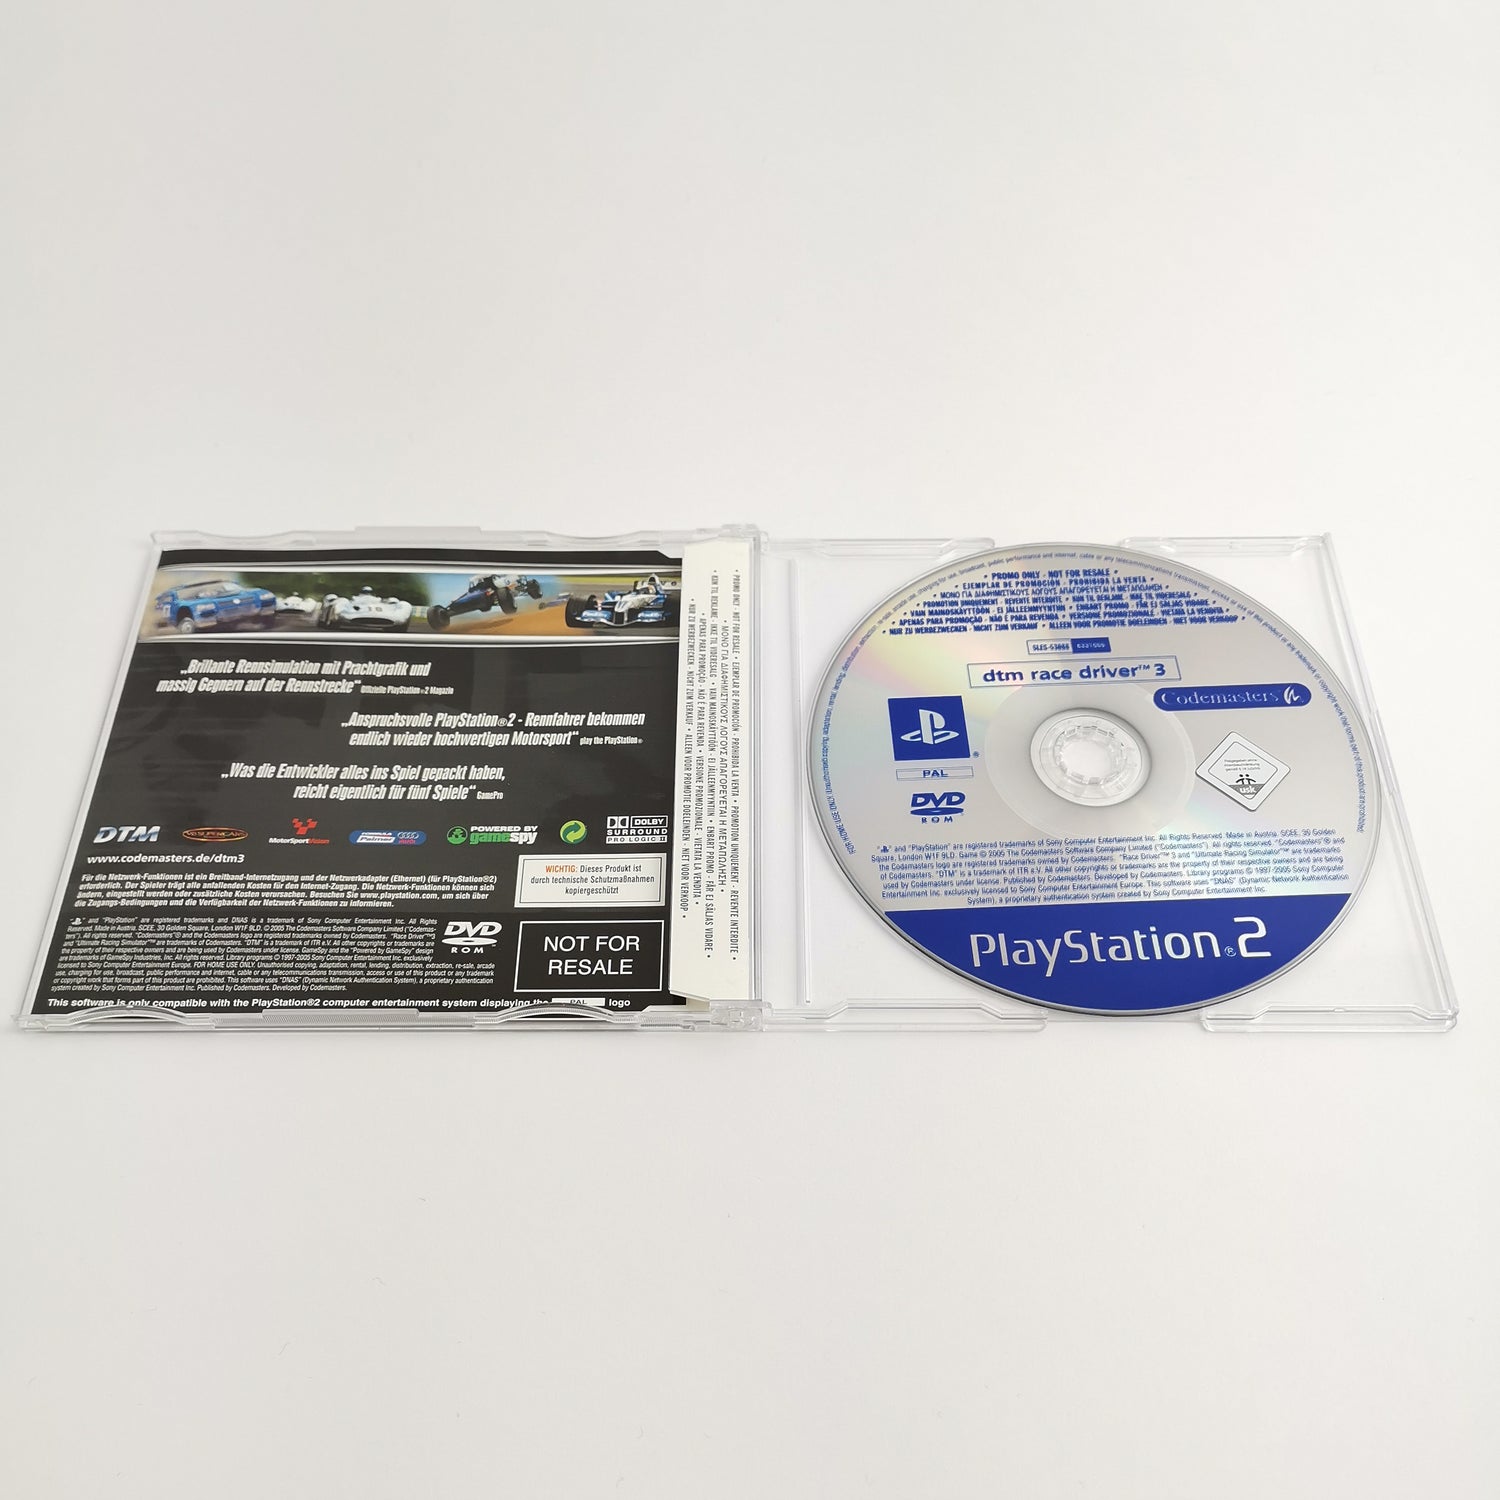 Sony Playstation 2 Promo Game: DTM Race Driver 3 - Full Version | PS2 OVP PAL